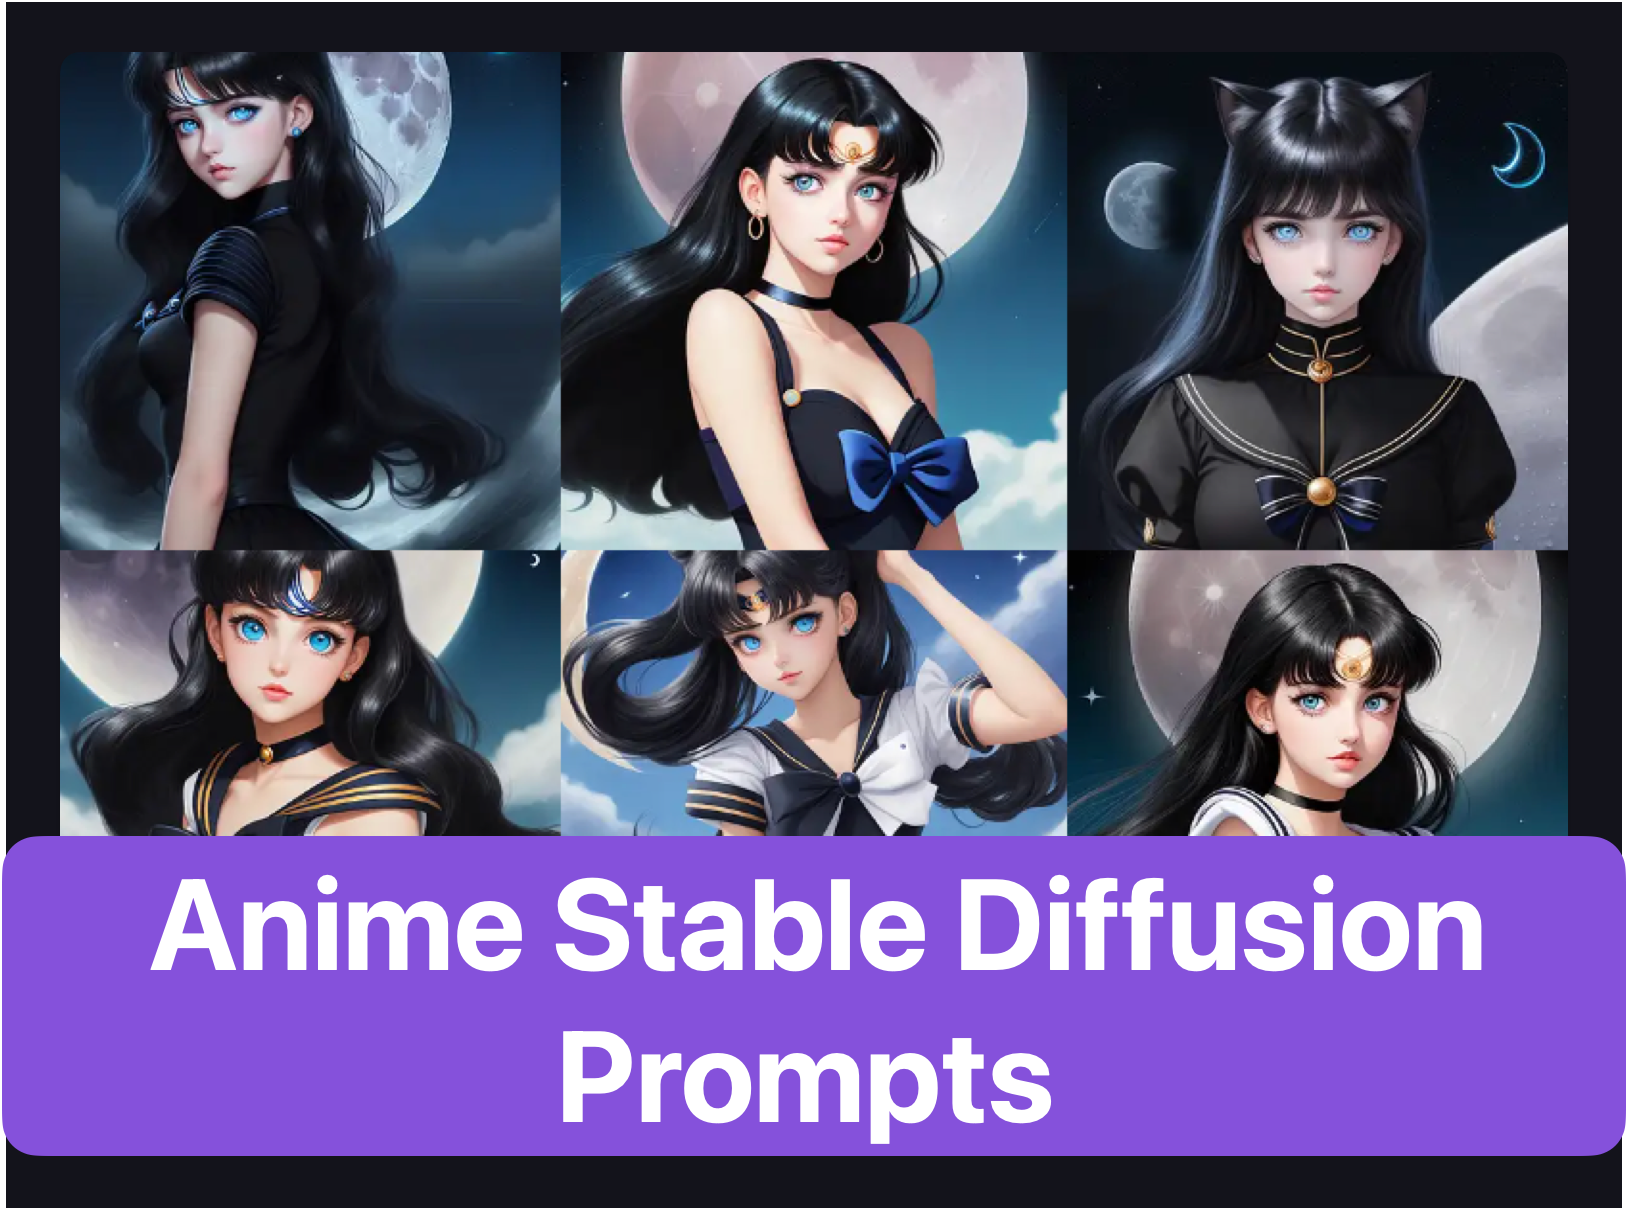 Anime Stable Diffusion Prompts: Find Your Next Character